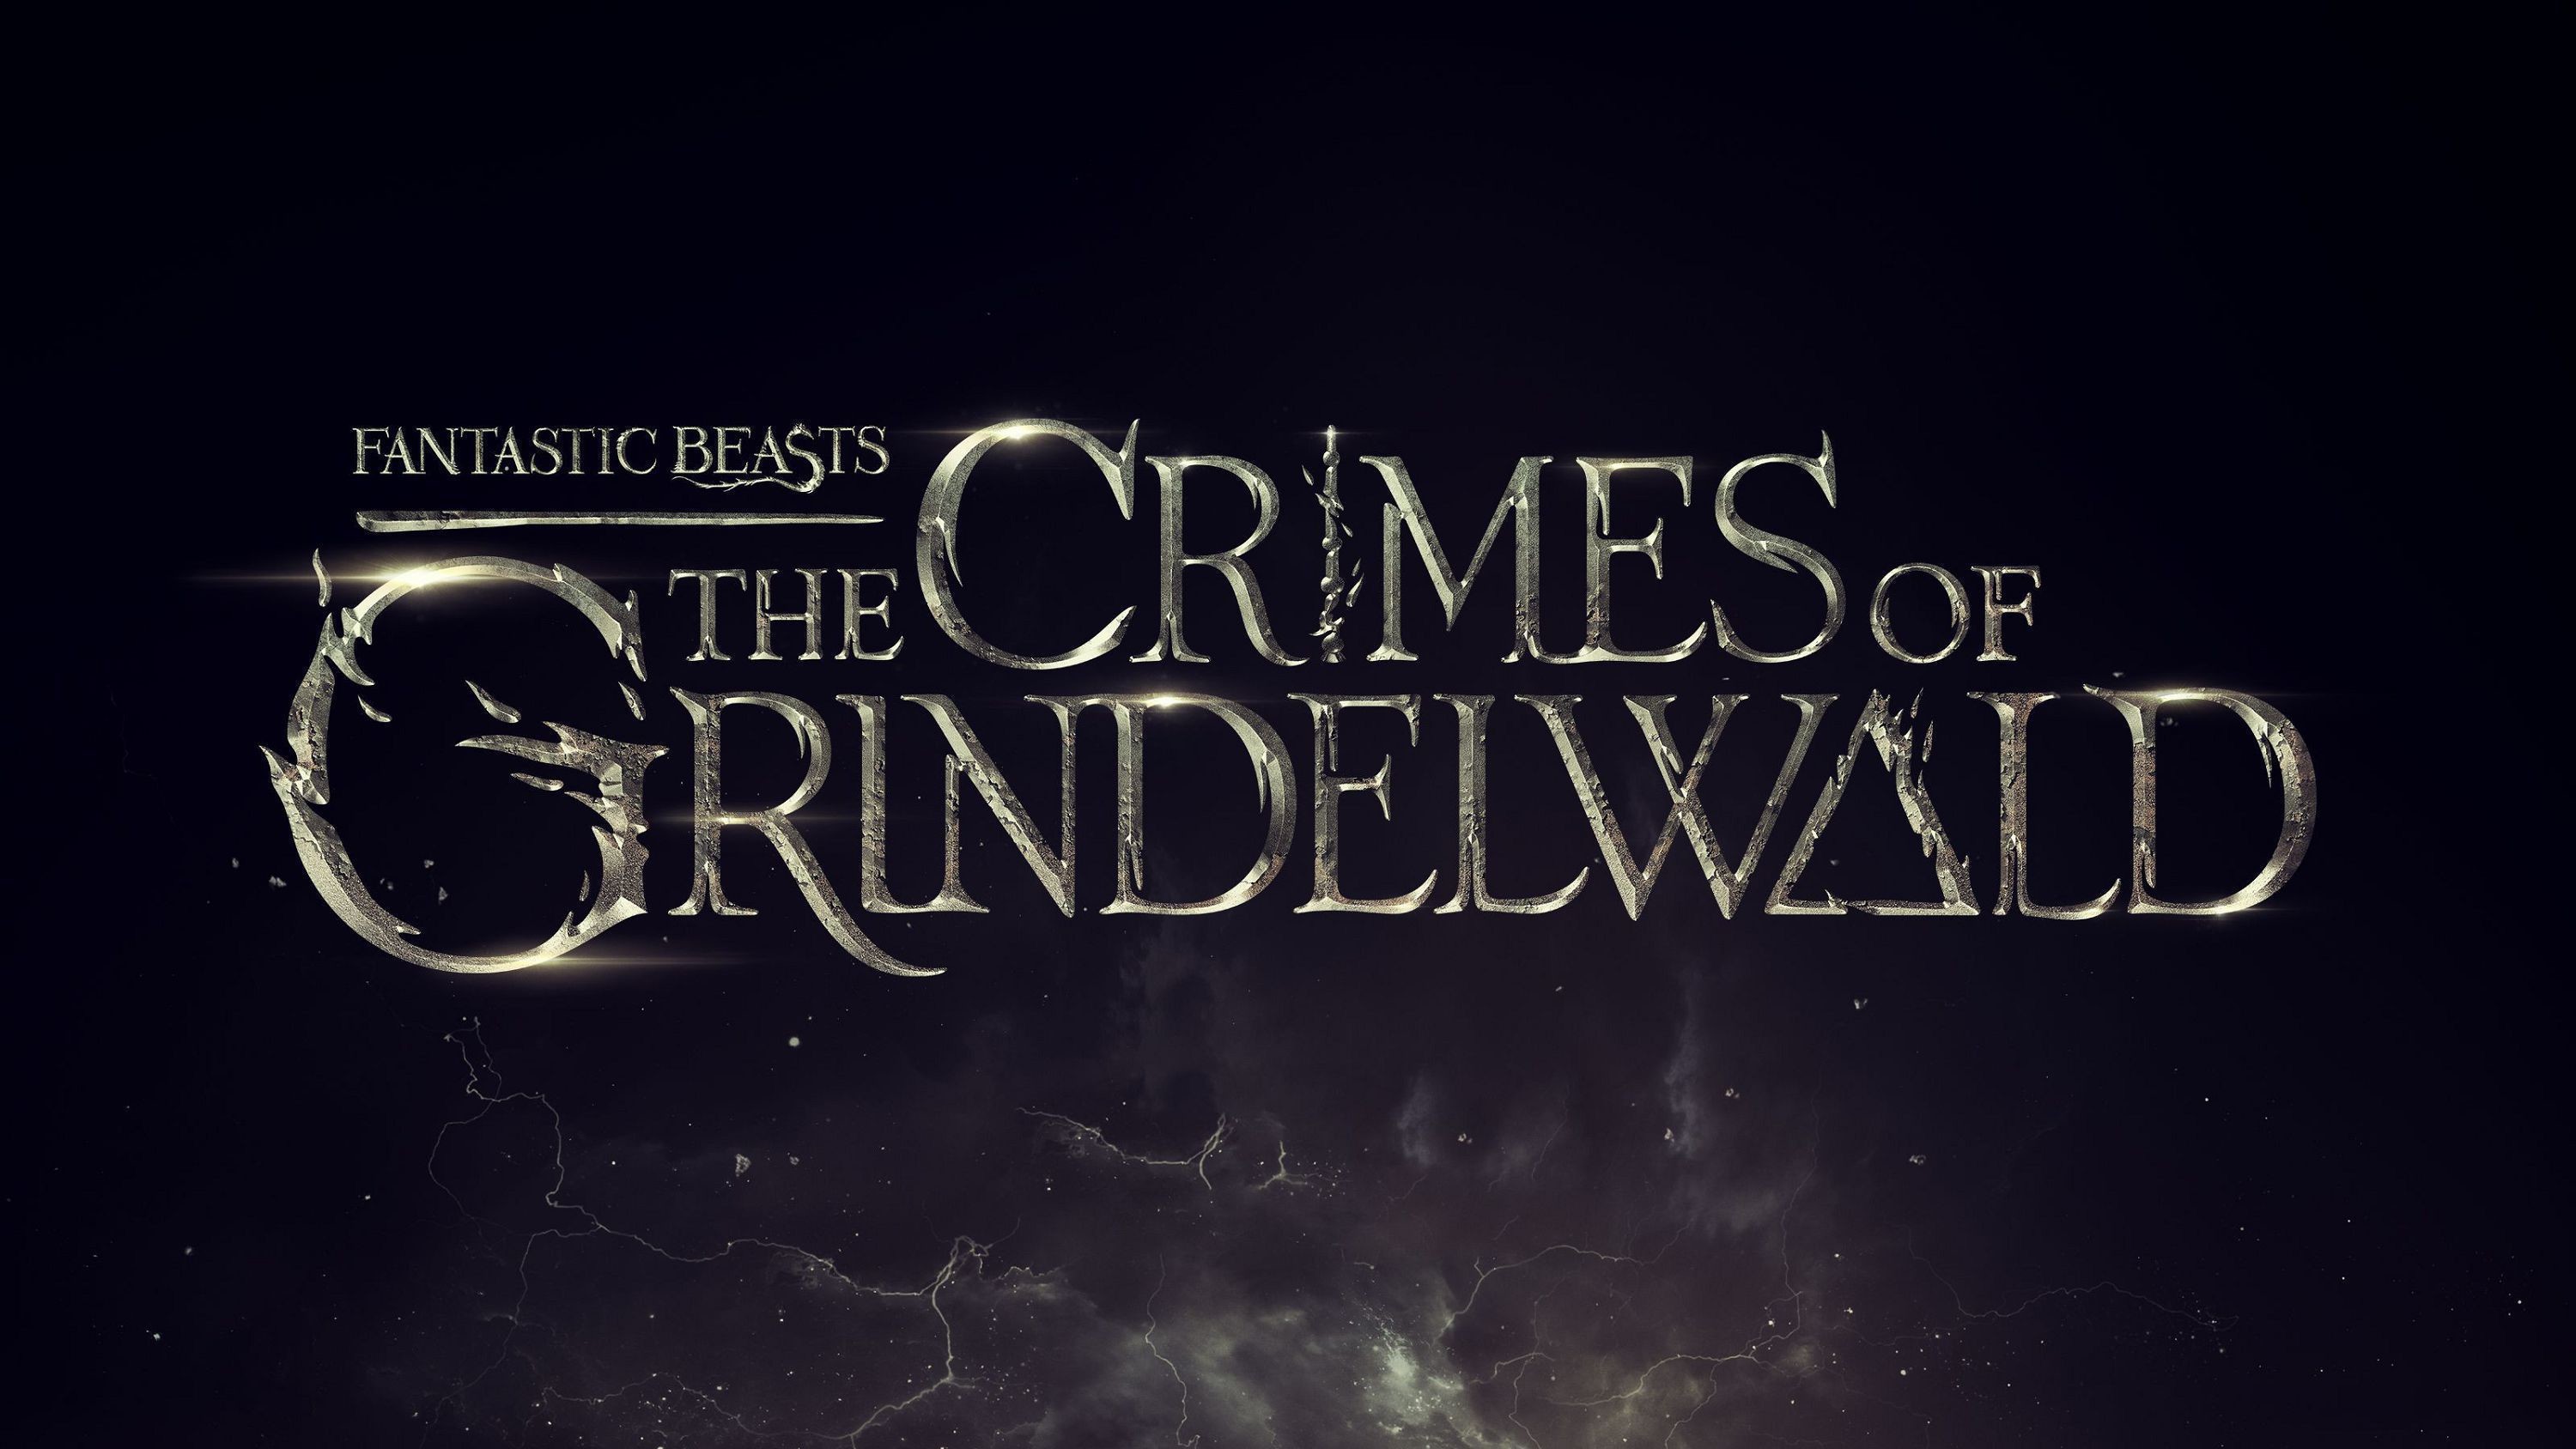 3000x1688 Fantastic Beasts The Crimes Of Grindelwald Wallpapers HD